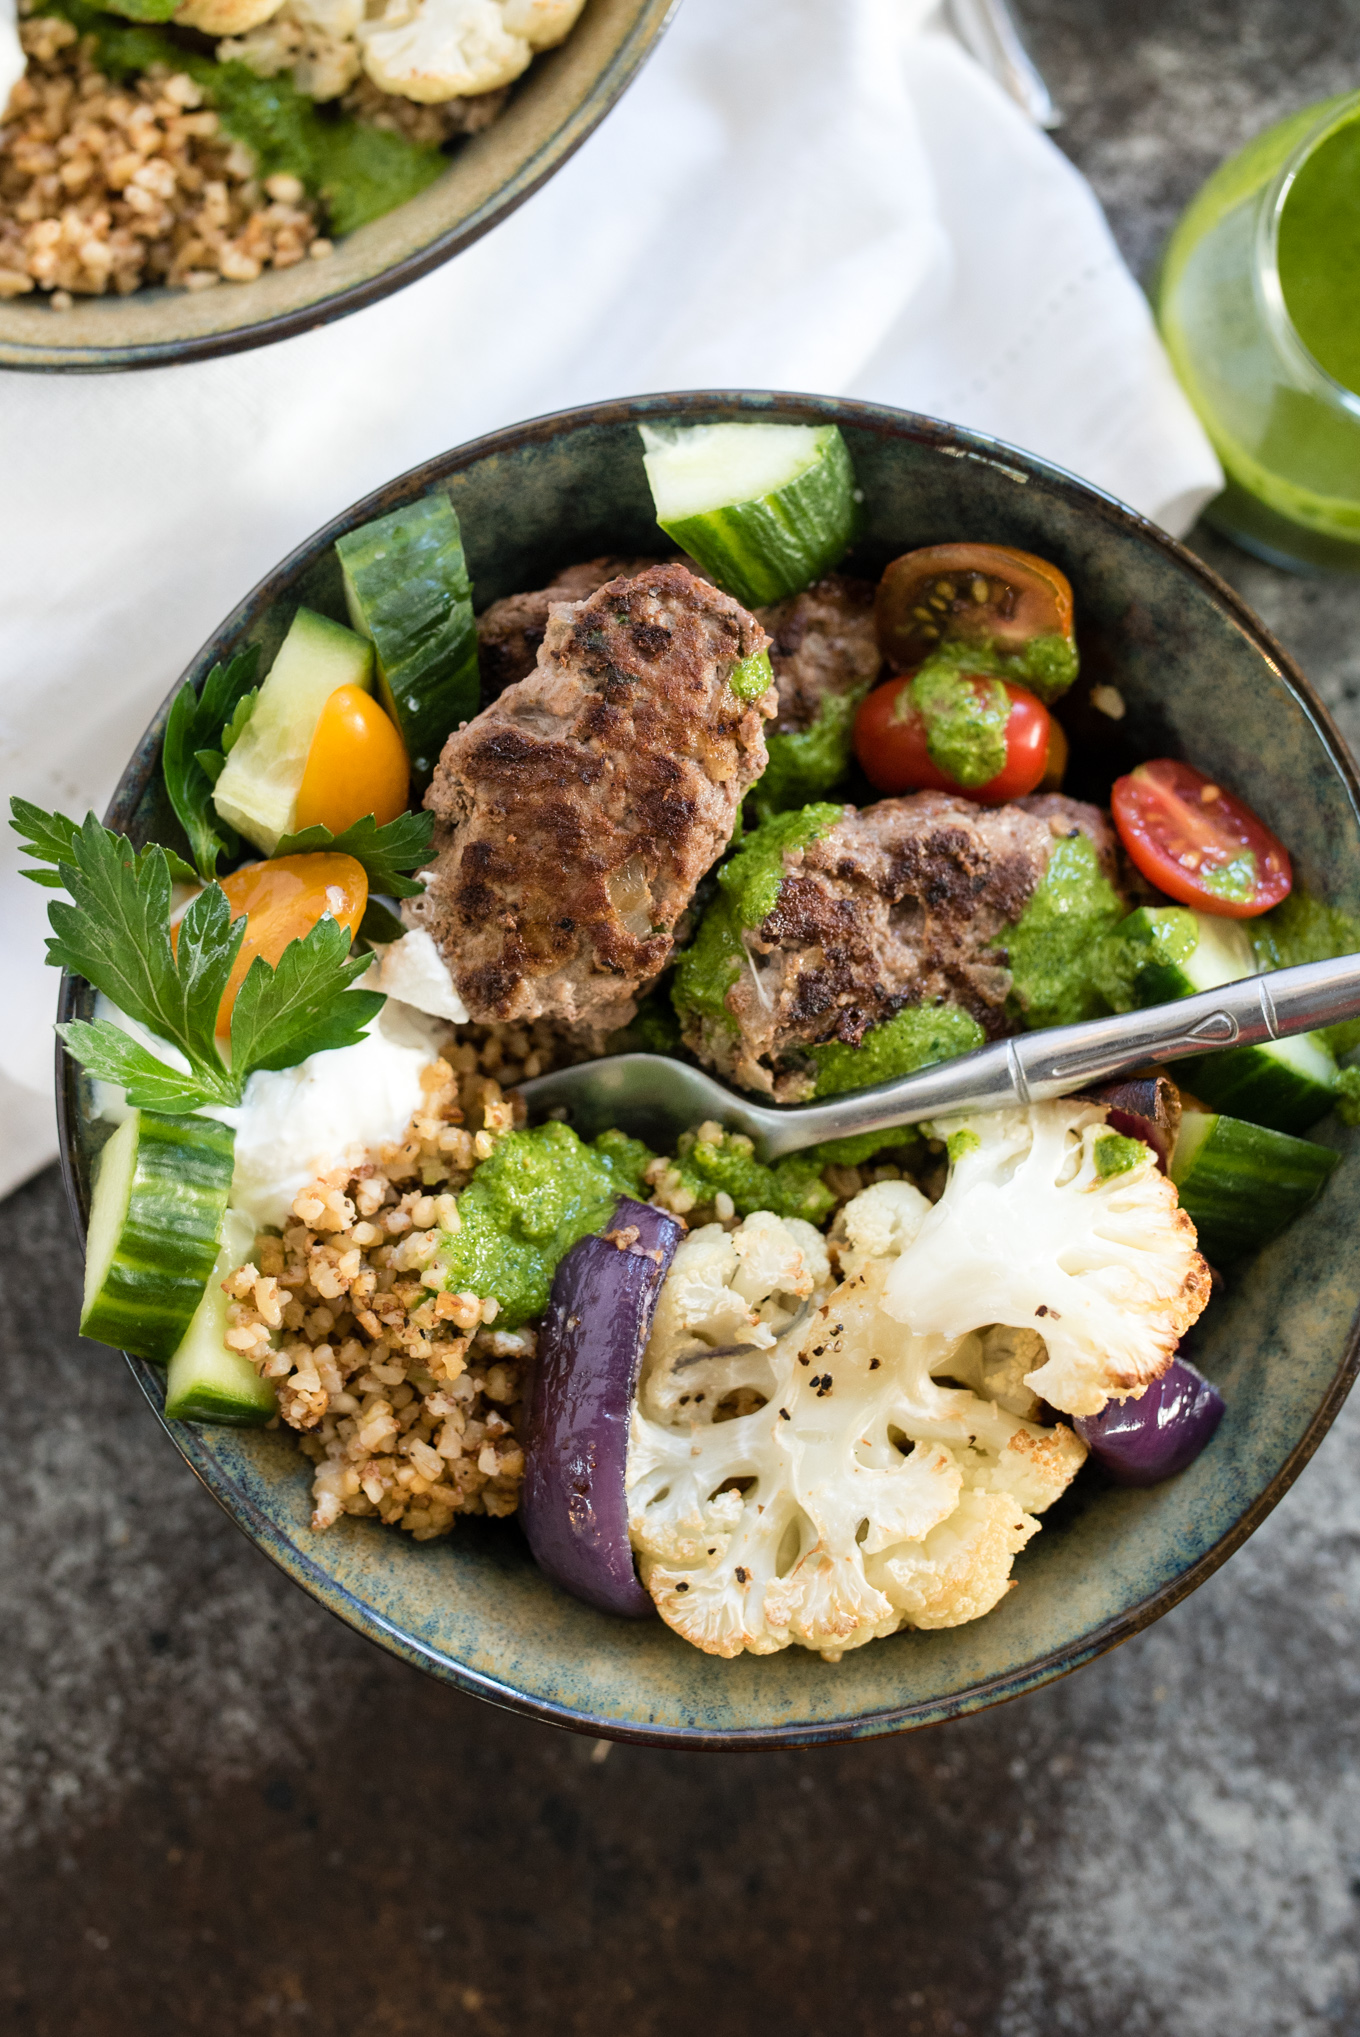 This Beef and Grain Kofta bowl takes Middle Eastern inspired meatballs and pairs them with a hearty flavorful grain and some veggies for a nutrition packed meal!